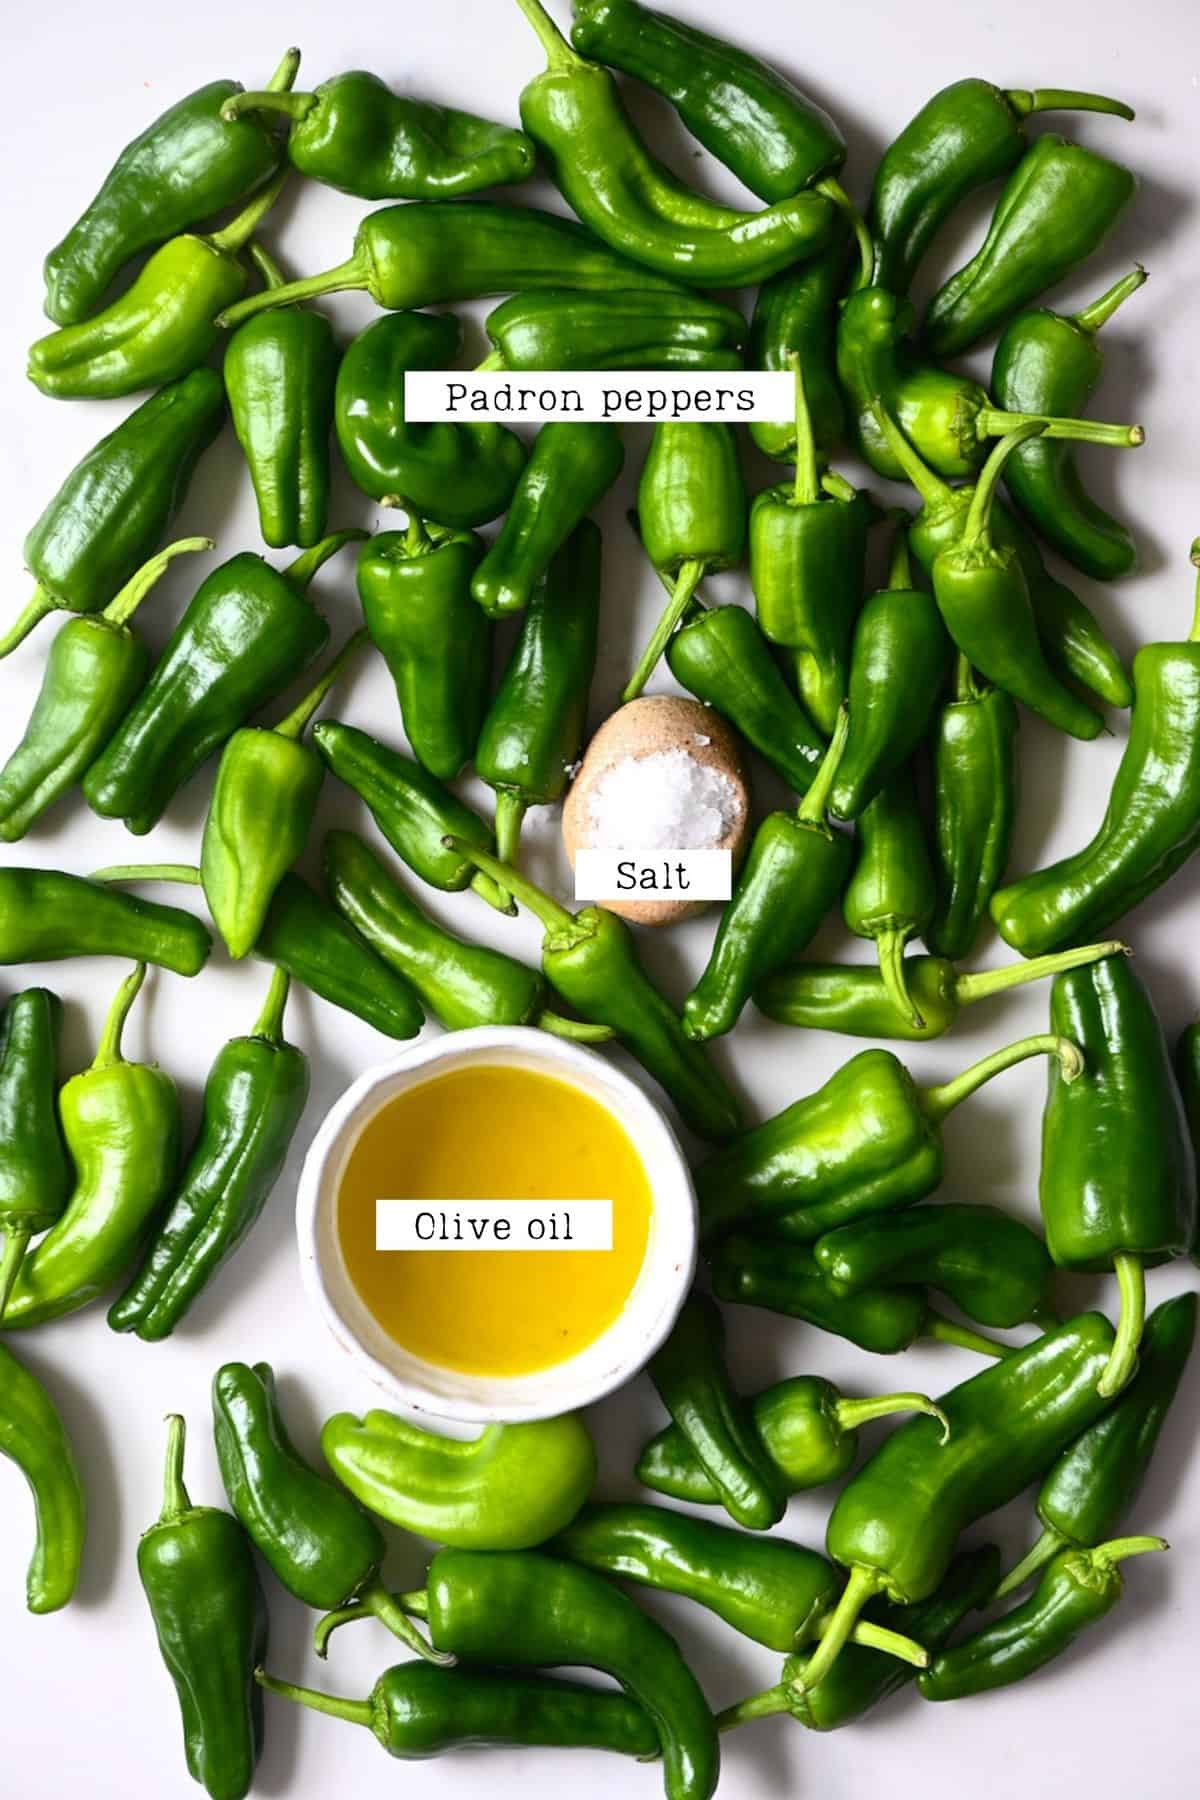 Padron Peppers Ingredients